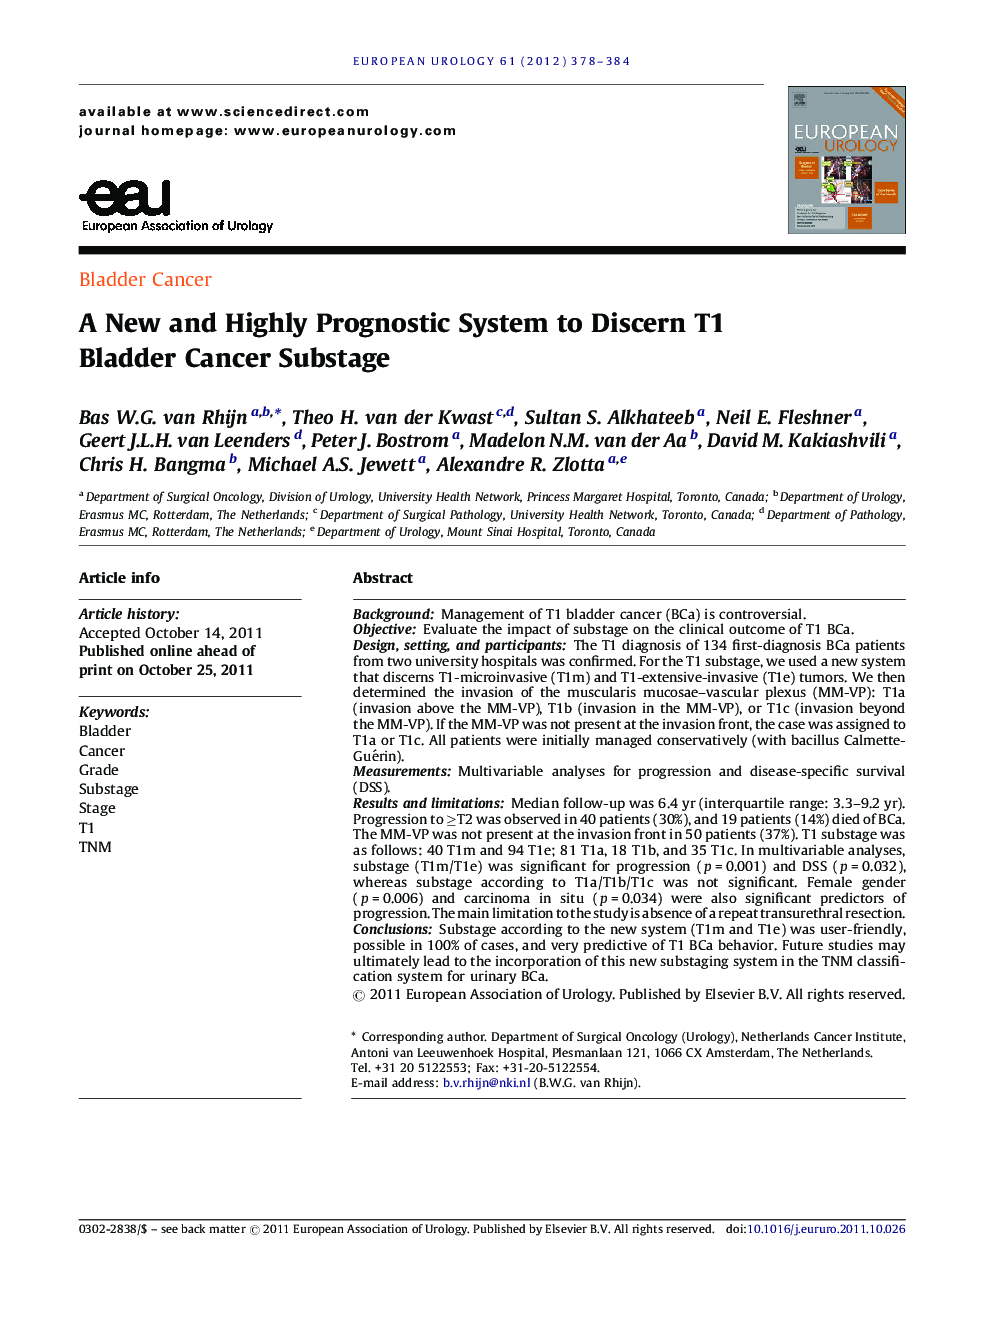 A New and Highly Prognostic System to Discern T1 Bladder Cancer Substage